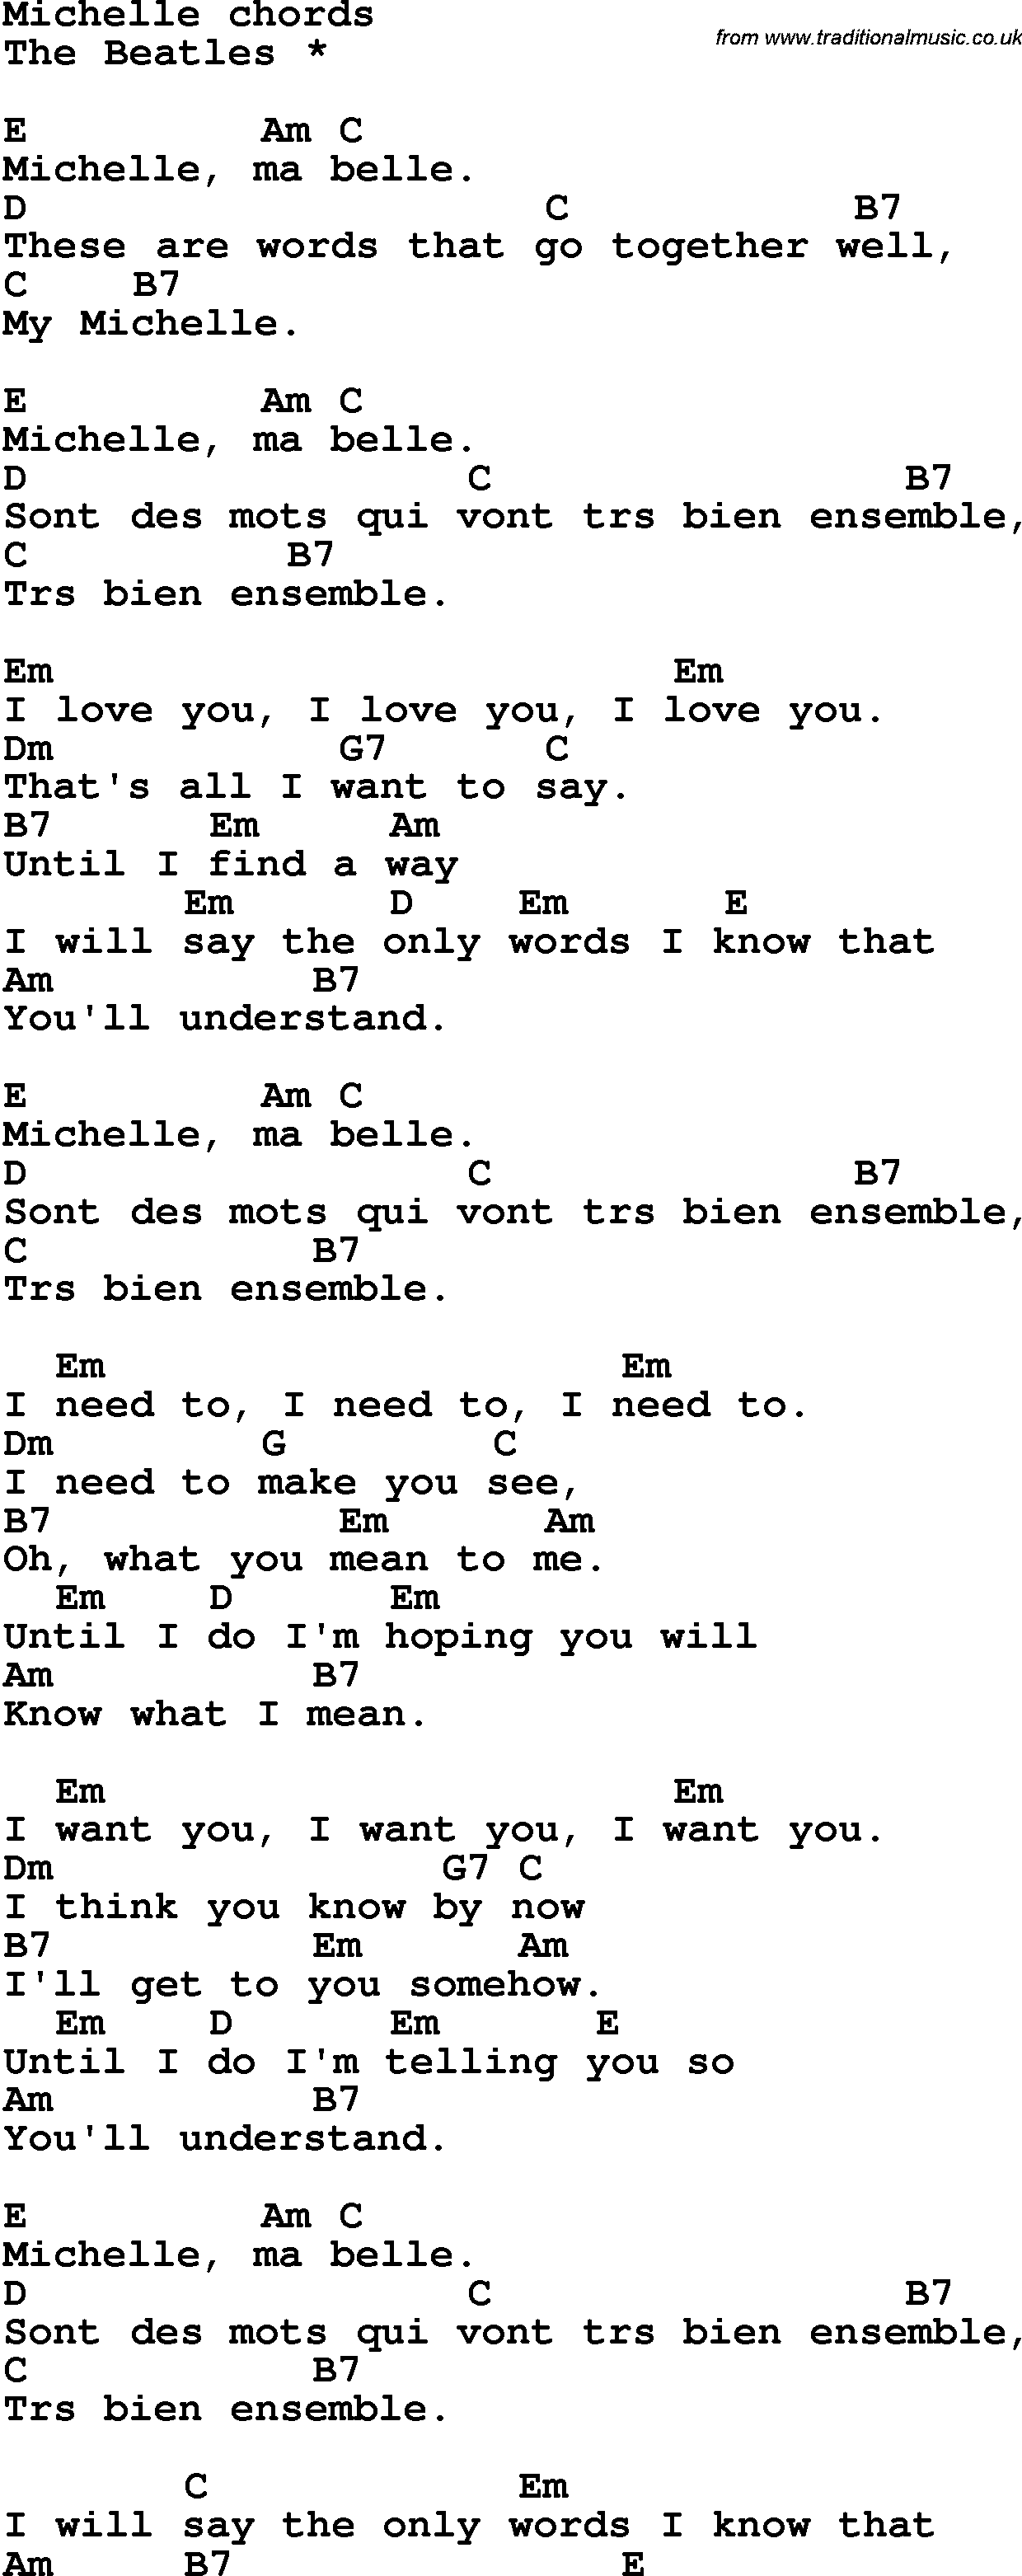 Song Lyrics with guitar chords for Michelle - The Beatles